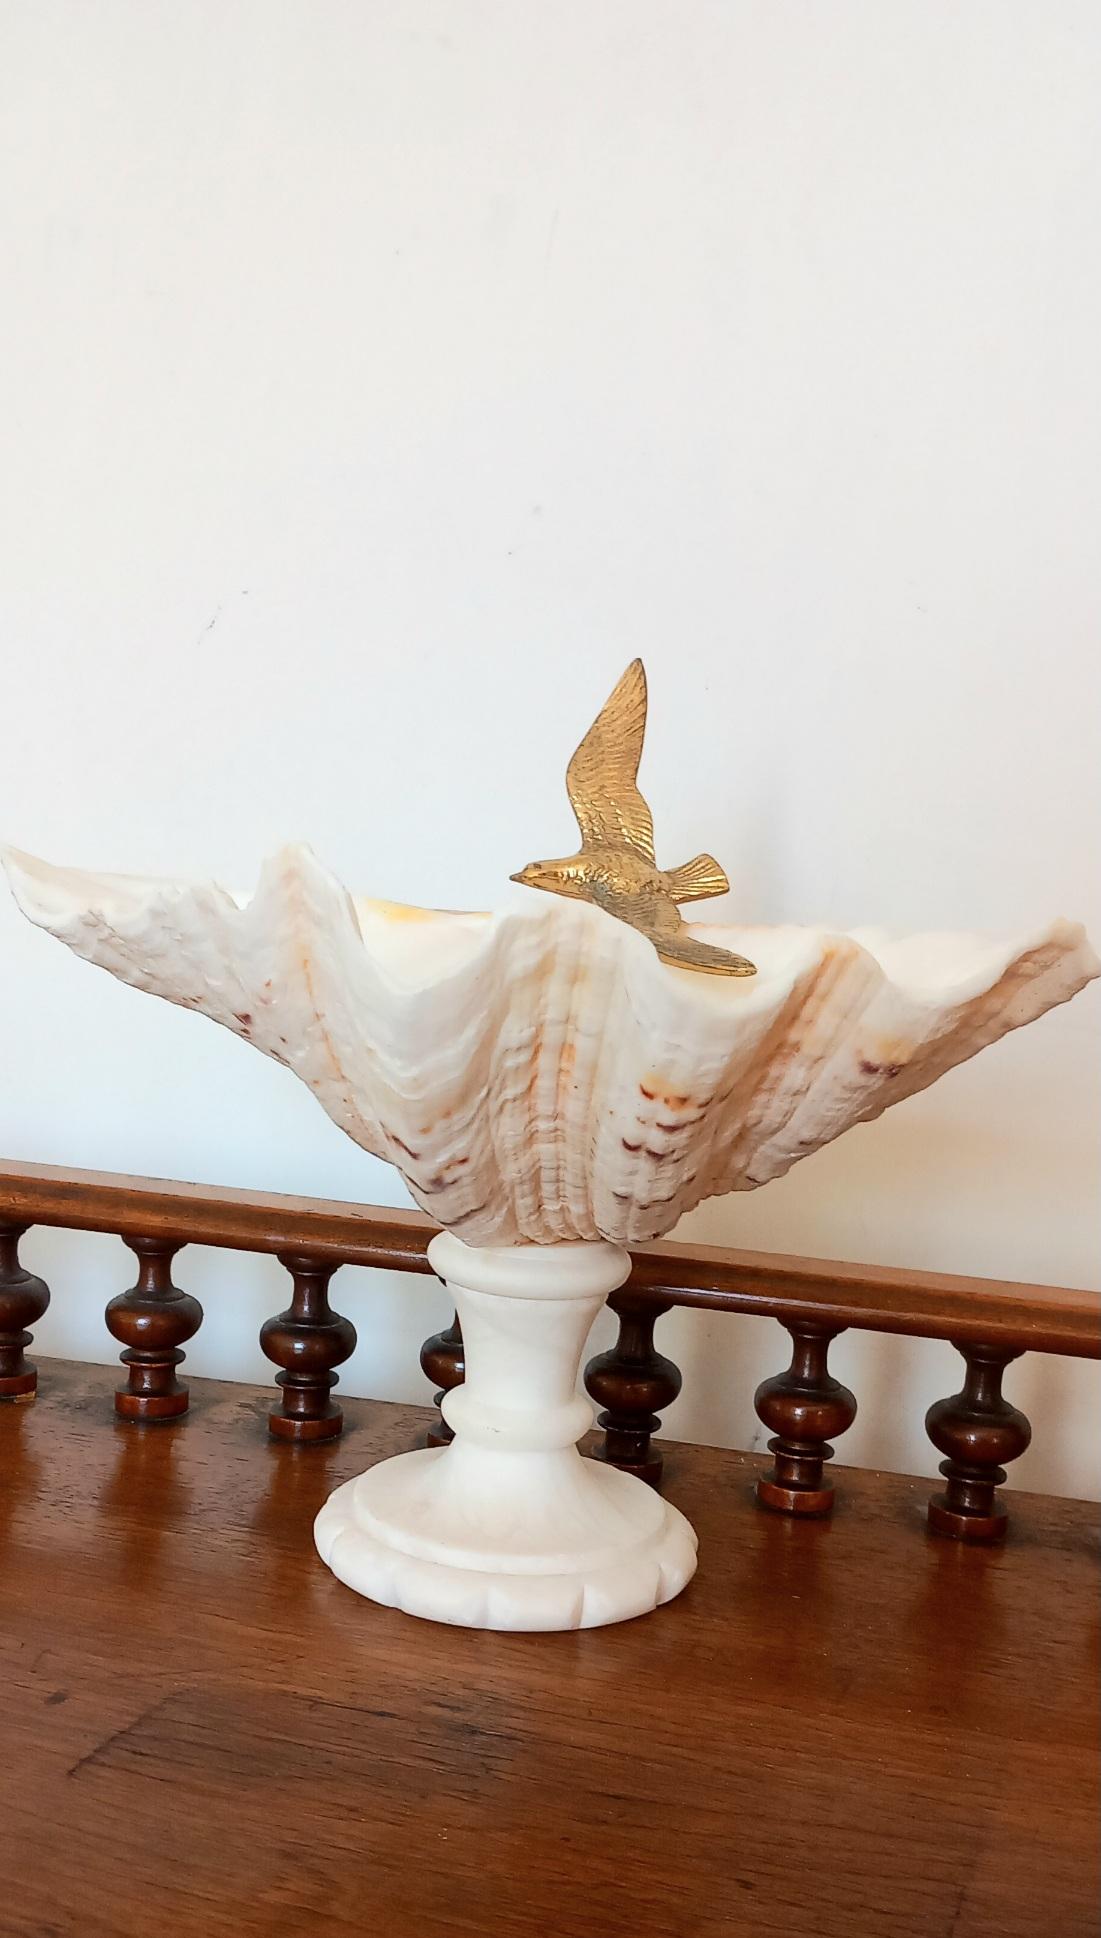  Shell Natural Specimen  With White Marble Pedestal Bronze Bird Can Be Removed For Sale 8